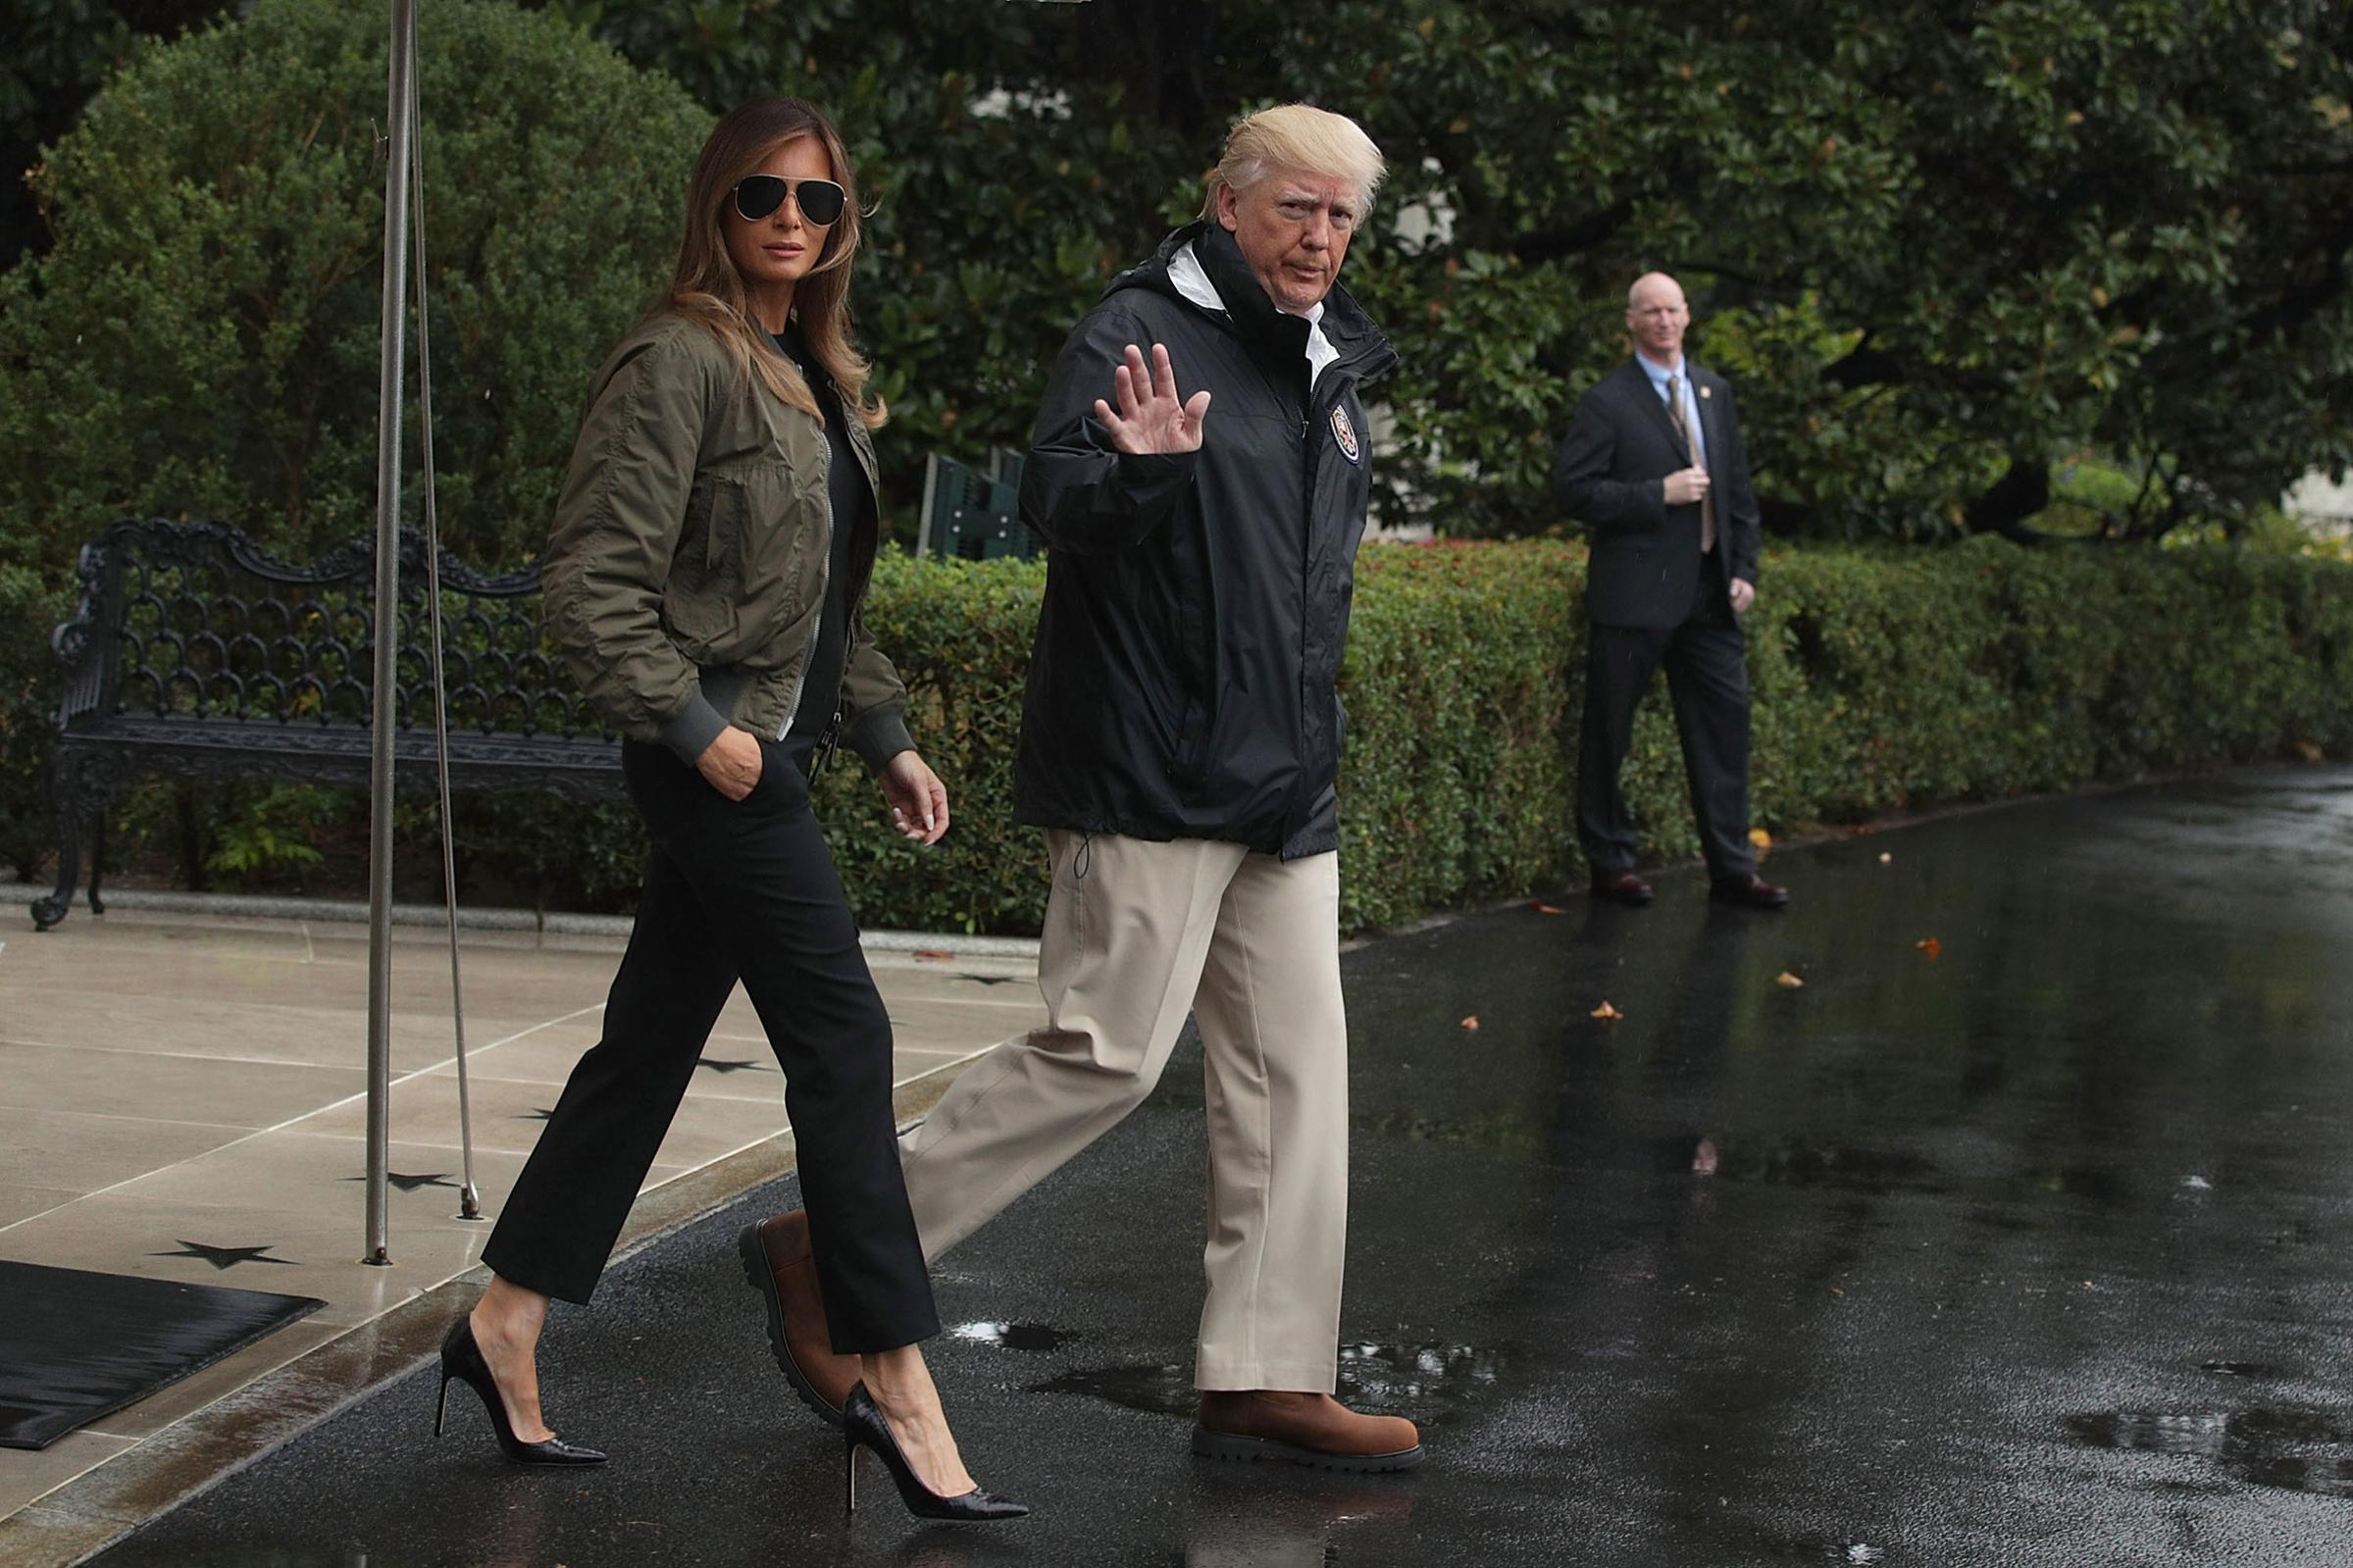 President Donald Trump walks with first lady Melania Trump, wearing Manolo Blahnik stilettos, on way to Texas to observe the Hurricane Harvey relief efforts, Aug.29, 2017.